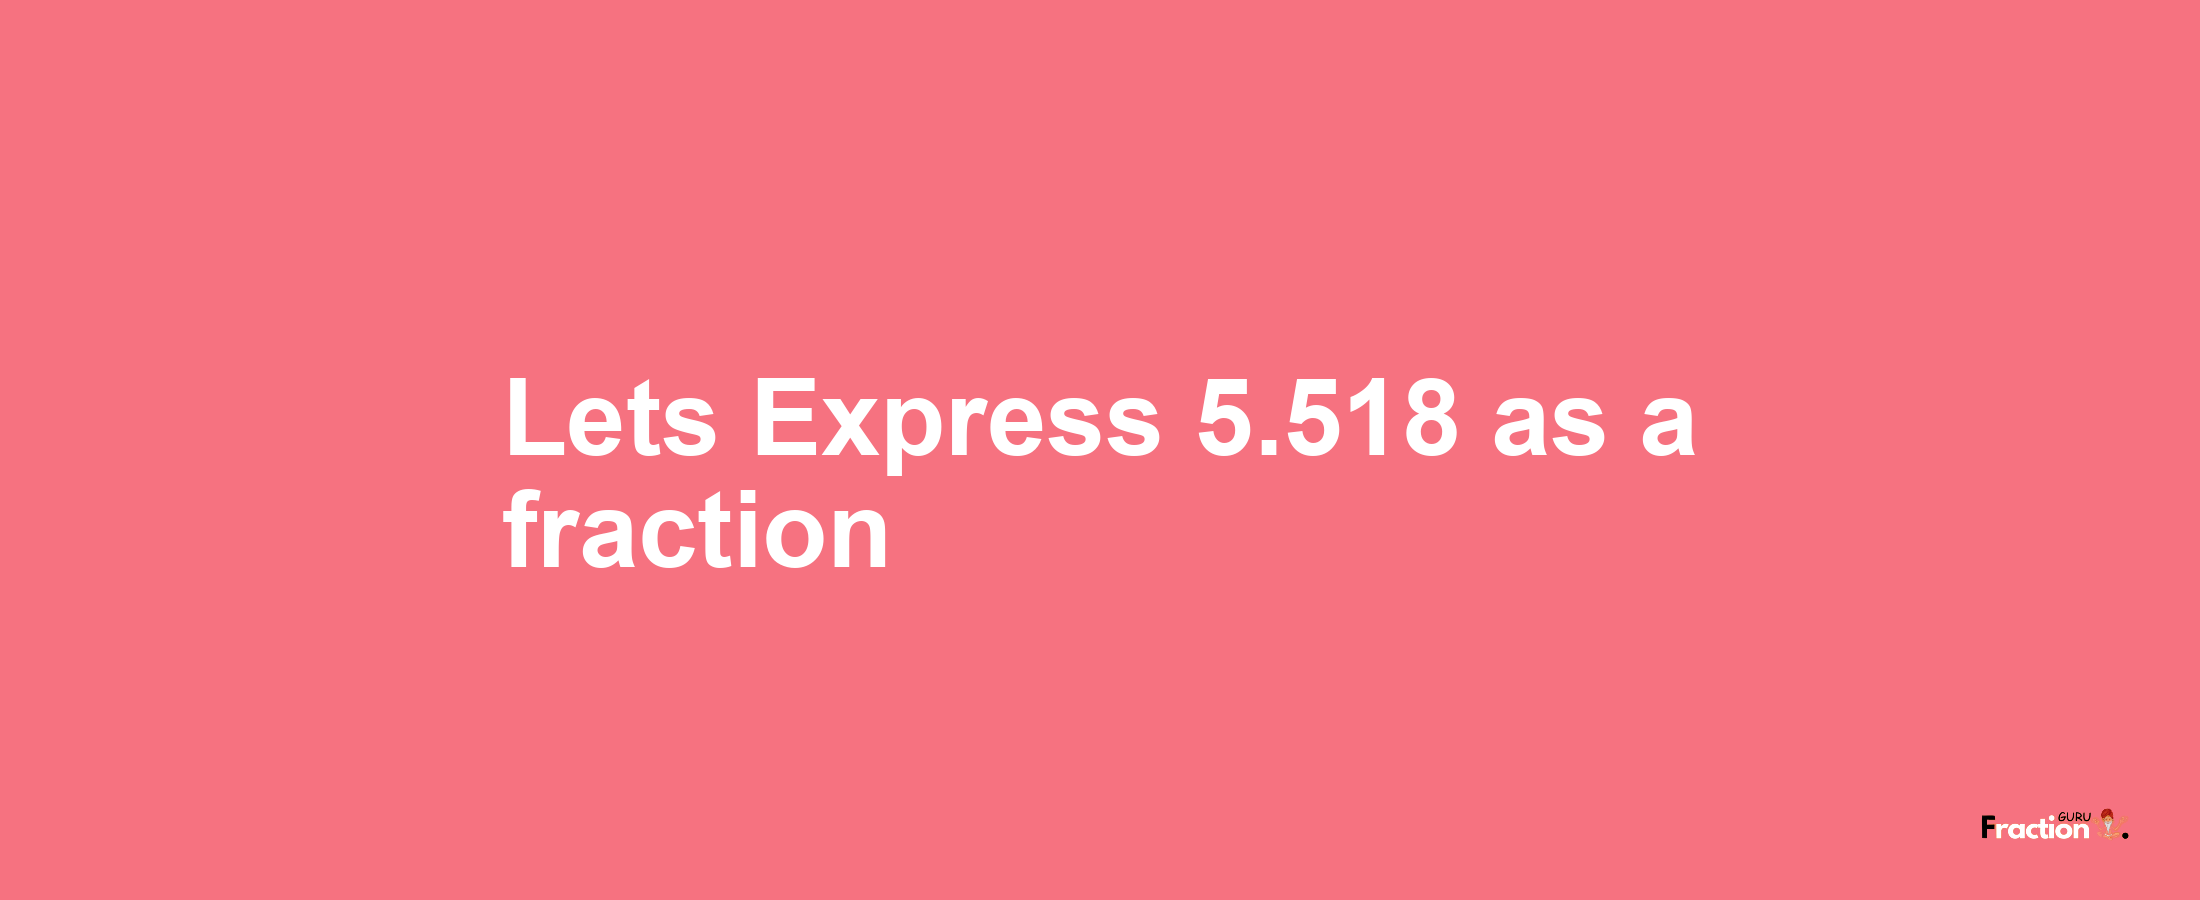 Lets Express 5.518 as afraction